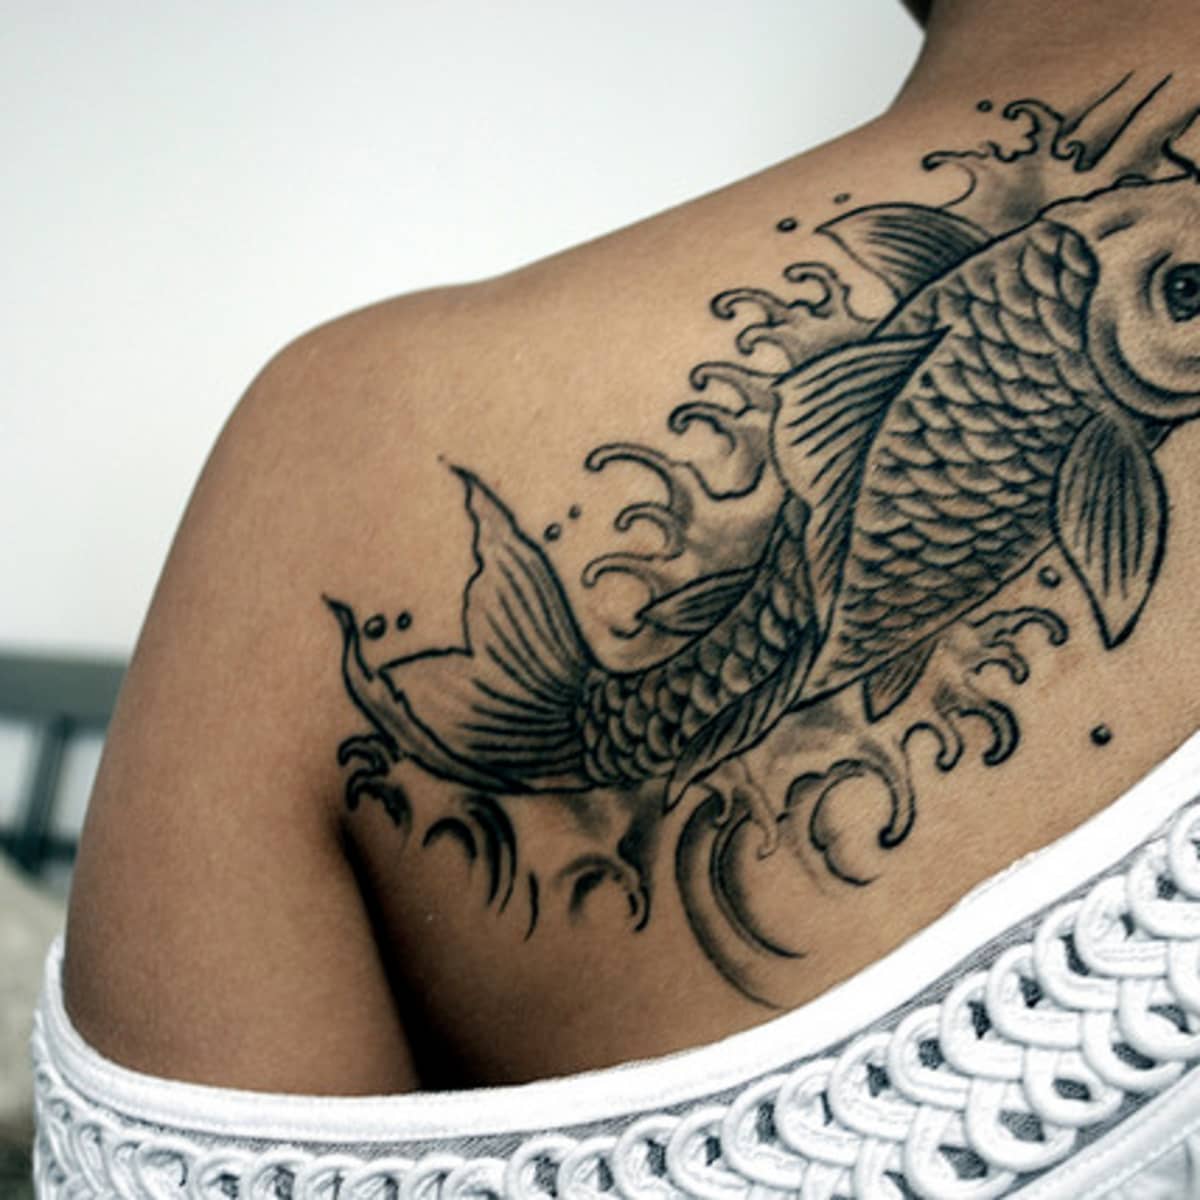 tattoos about overcoming struggles